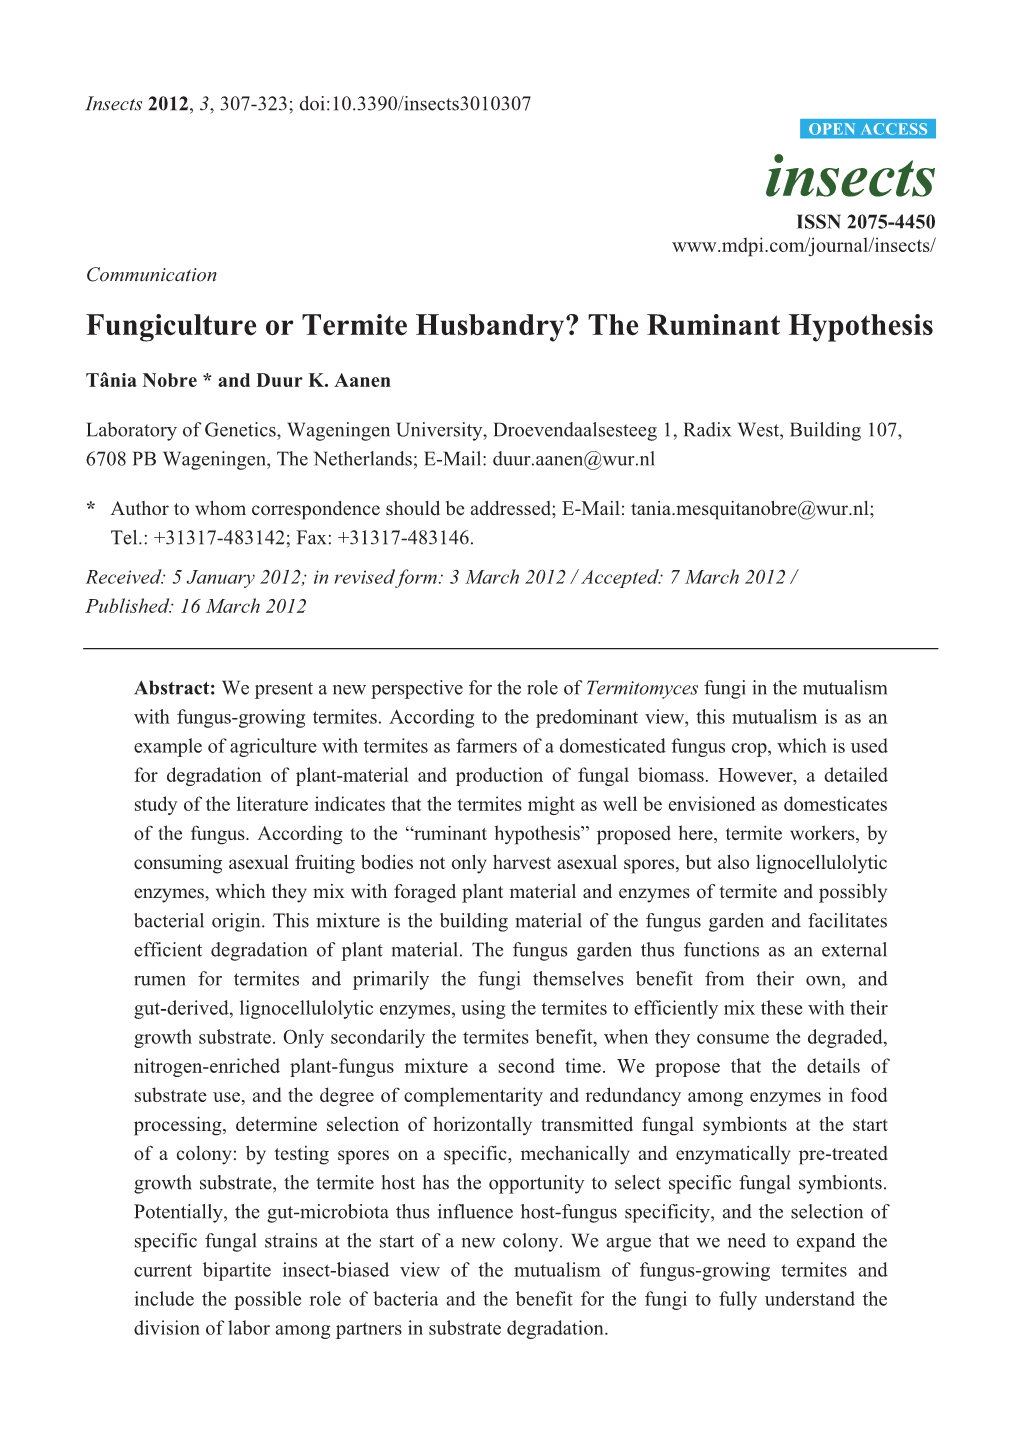 Fungiculture Or Termite Husbandry? the Ruminant Hypothesis